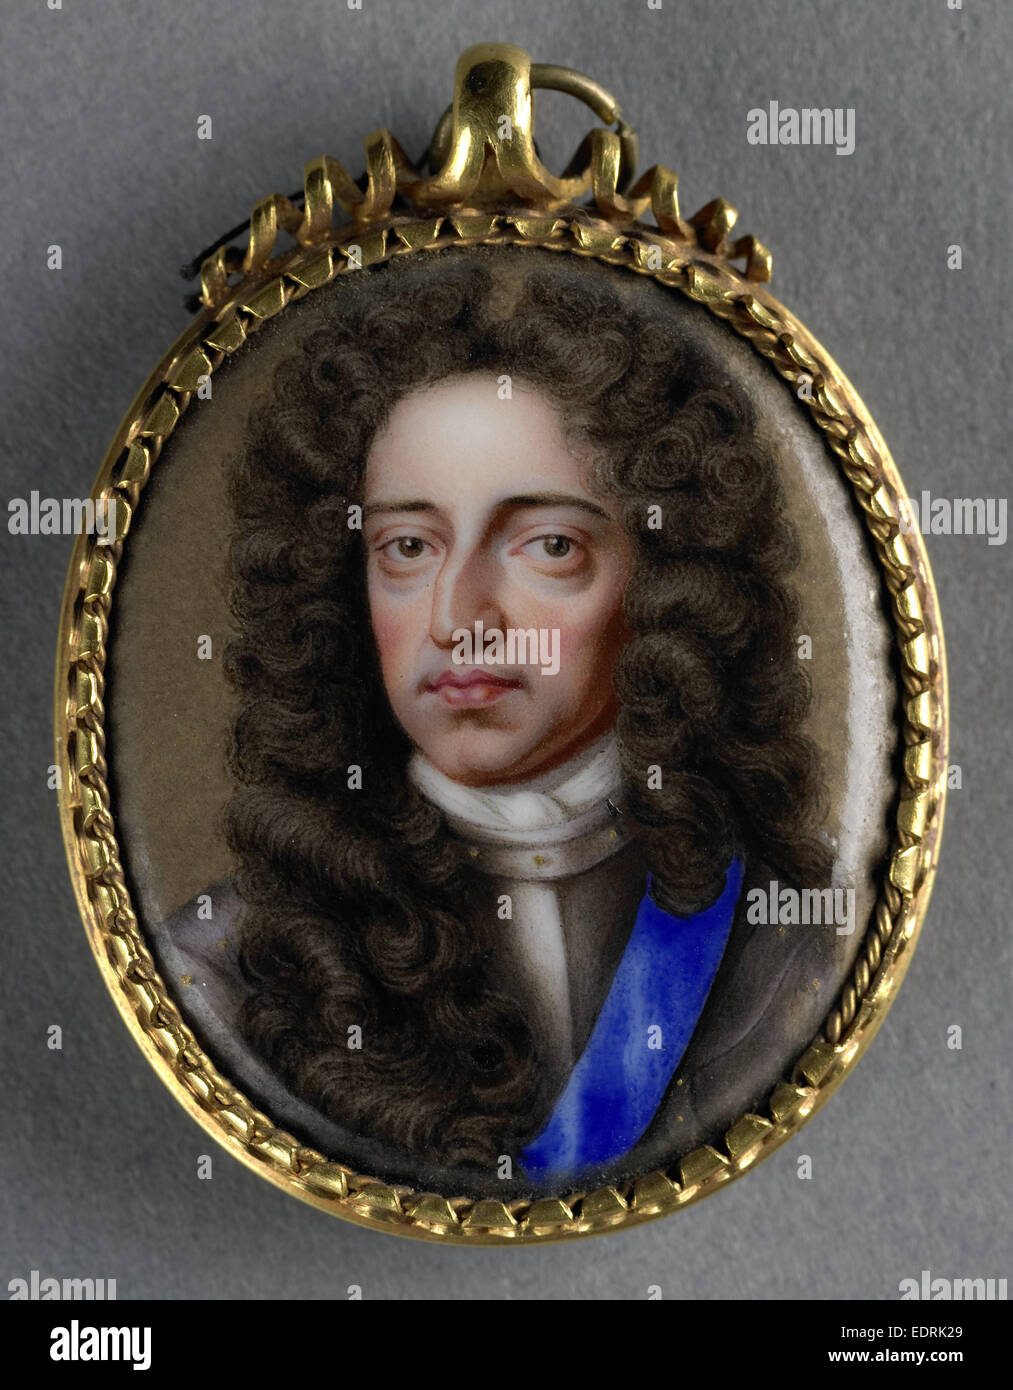 Willem III, 1650-1702, Prince of Orange. Since 1689 King of England, attributed to Charles Boit, 1690 - 1727, Portrait miniature Stock Photo